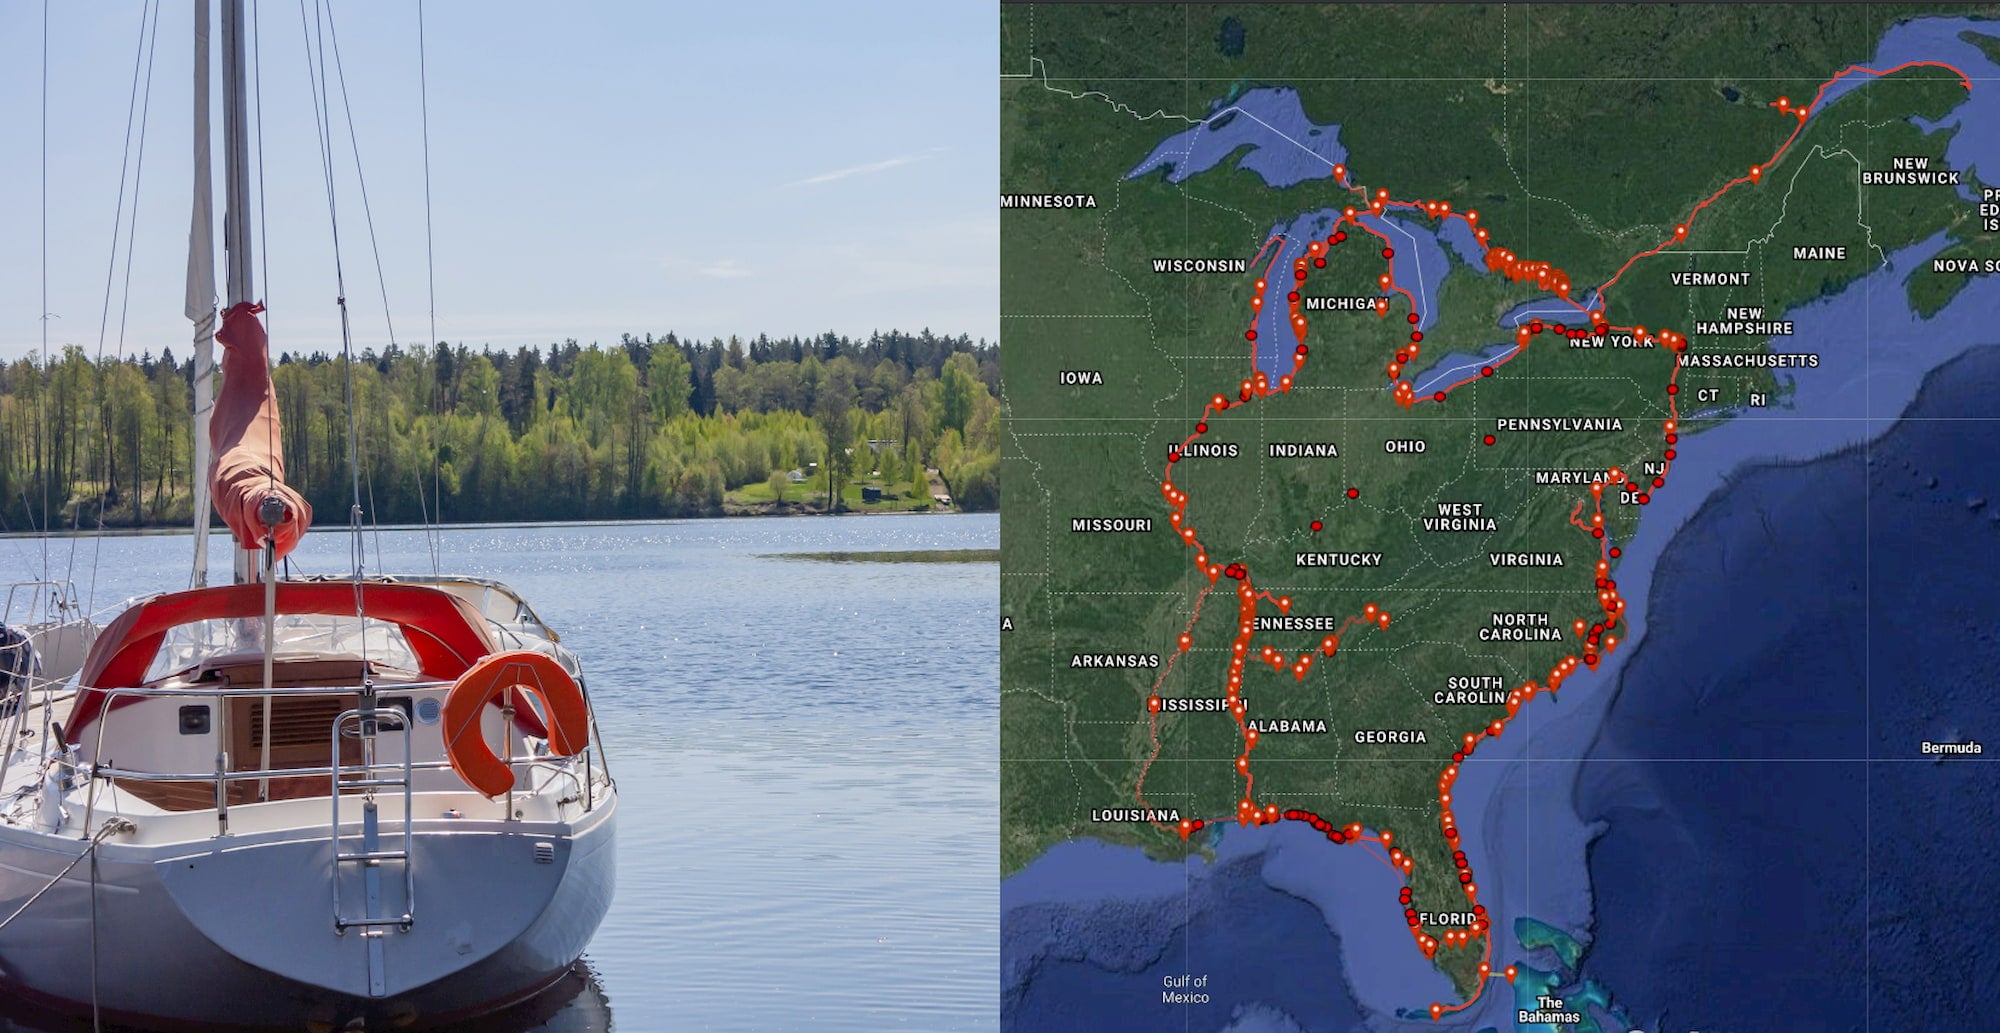 Left: Large sailboat anchored beyond land. Right: Pinpoints on map of the great loop spanning over the eastern side of North America.